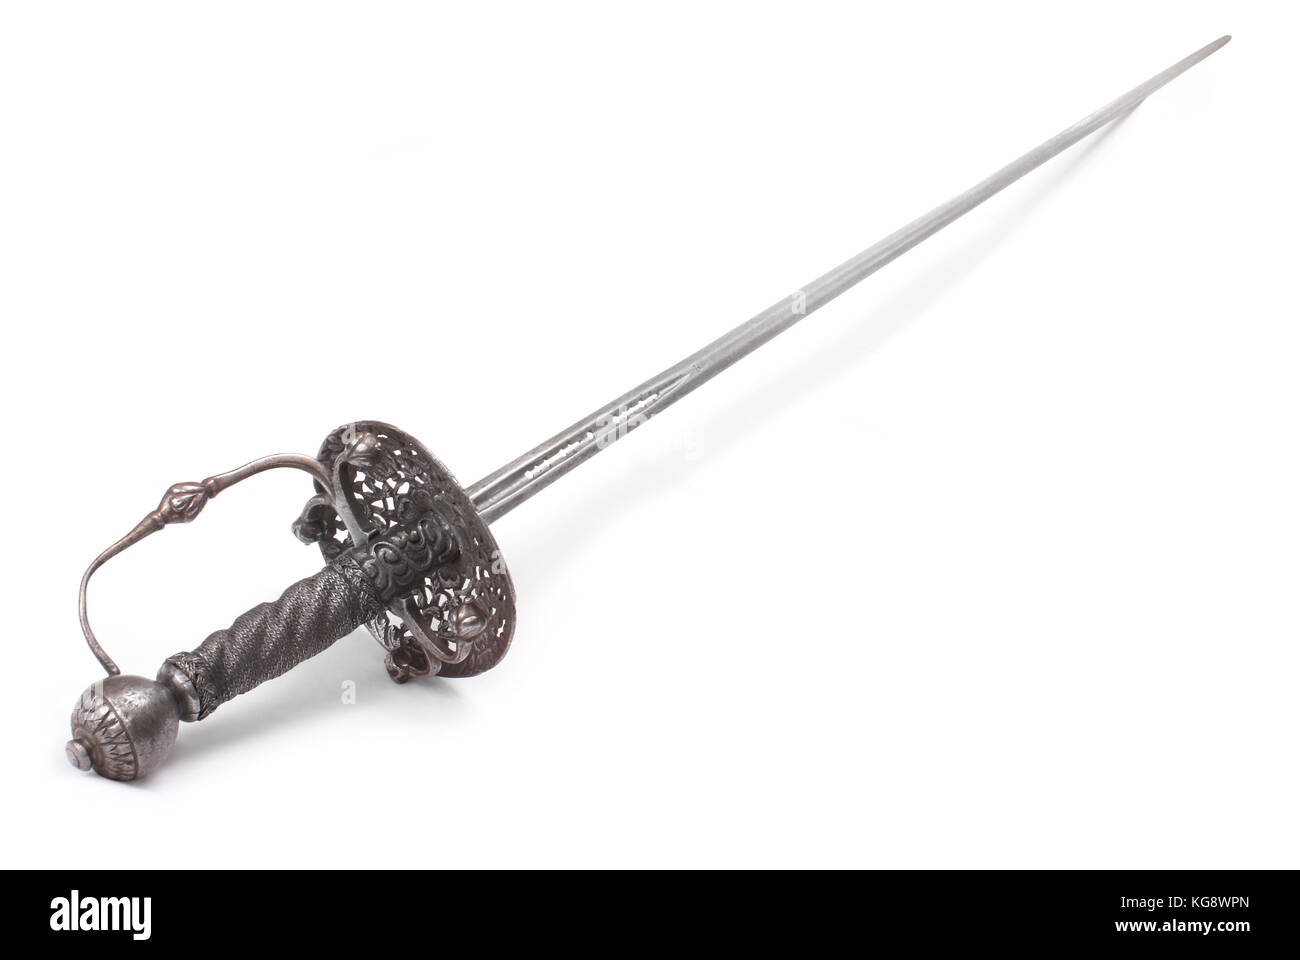 Sword (rapier) of French noble with Spainish blade. France, 18 century Stock Photo